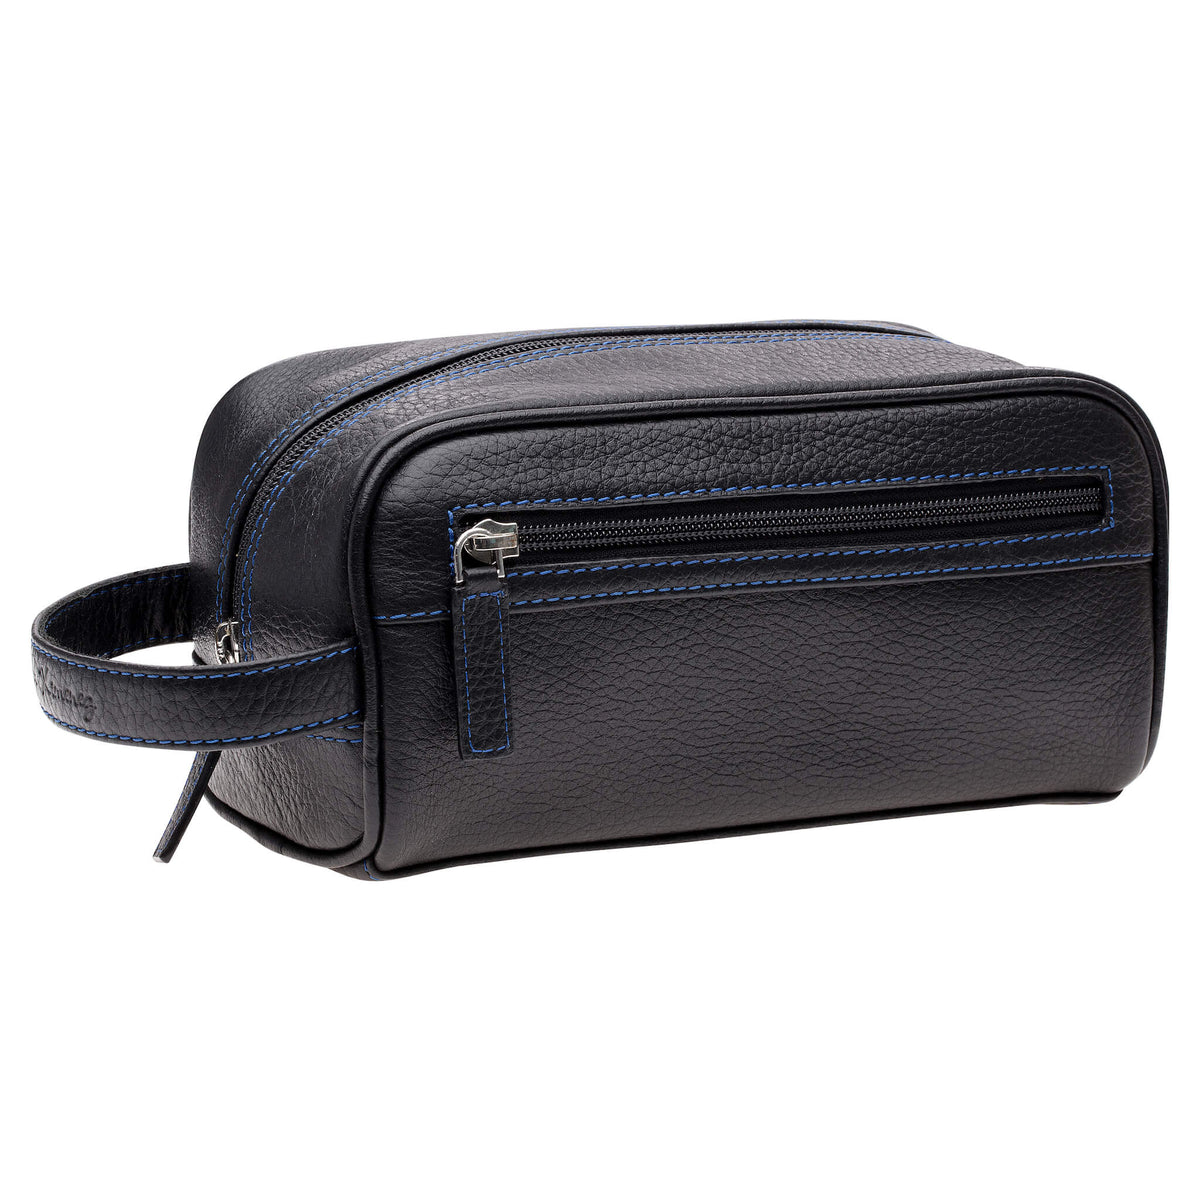 Black Leather Toiletry Bag - Cobalt | Mens Fashion &amp; Leather Goods by Roger Ximenez